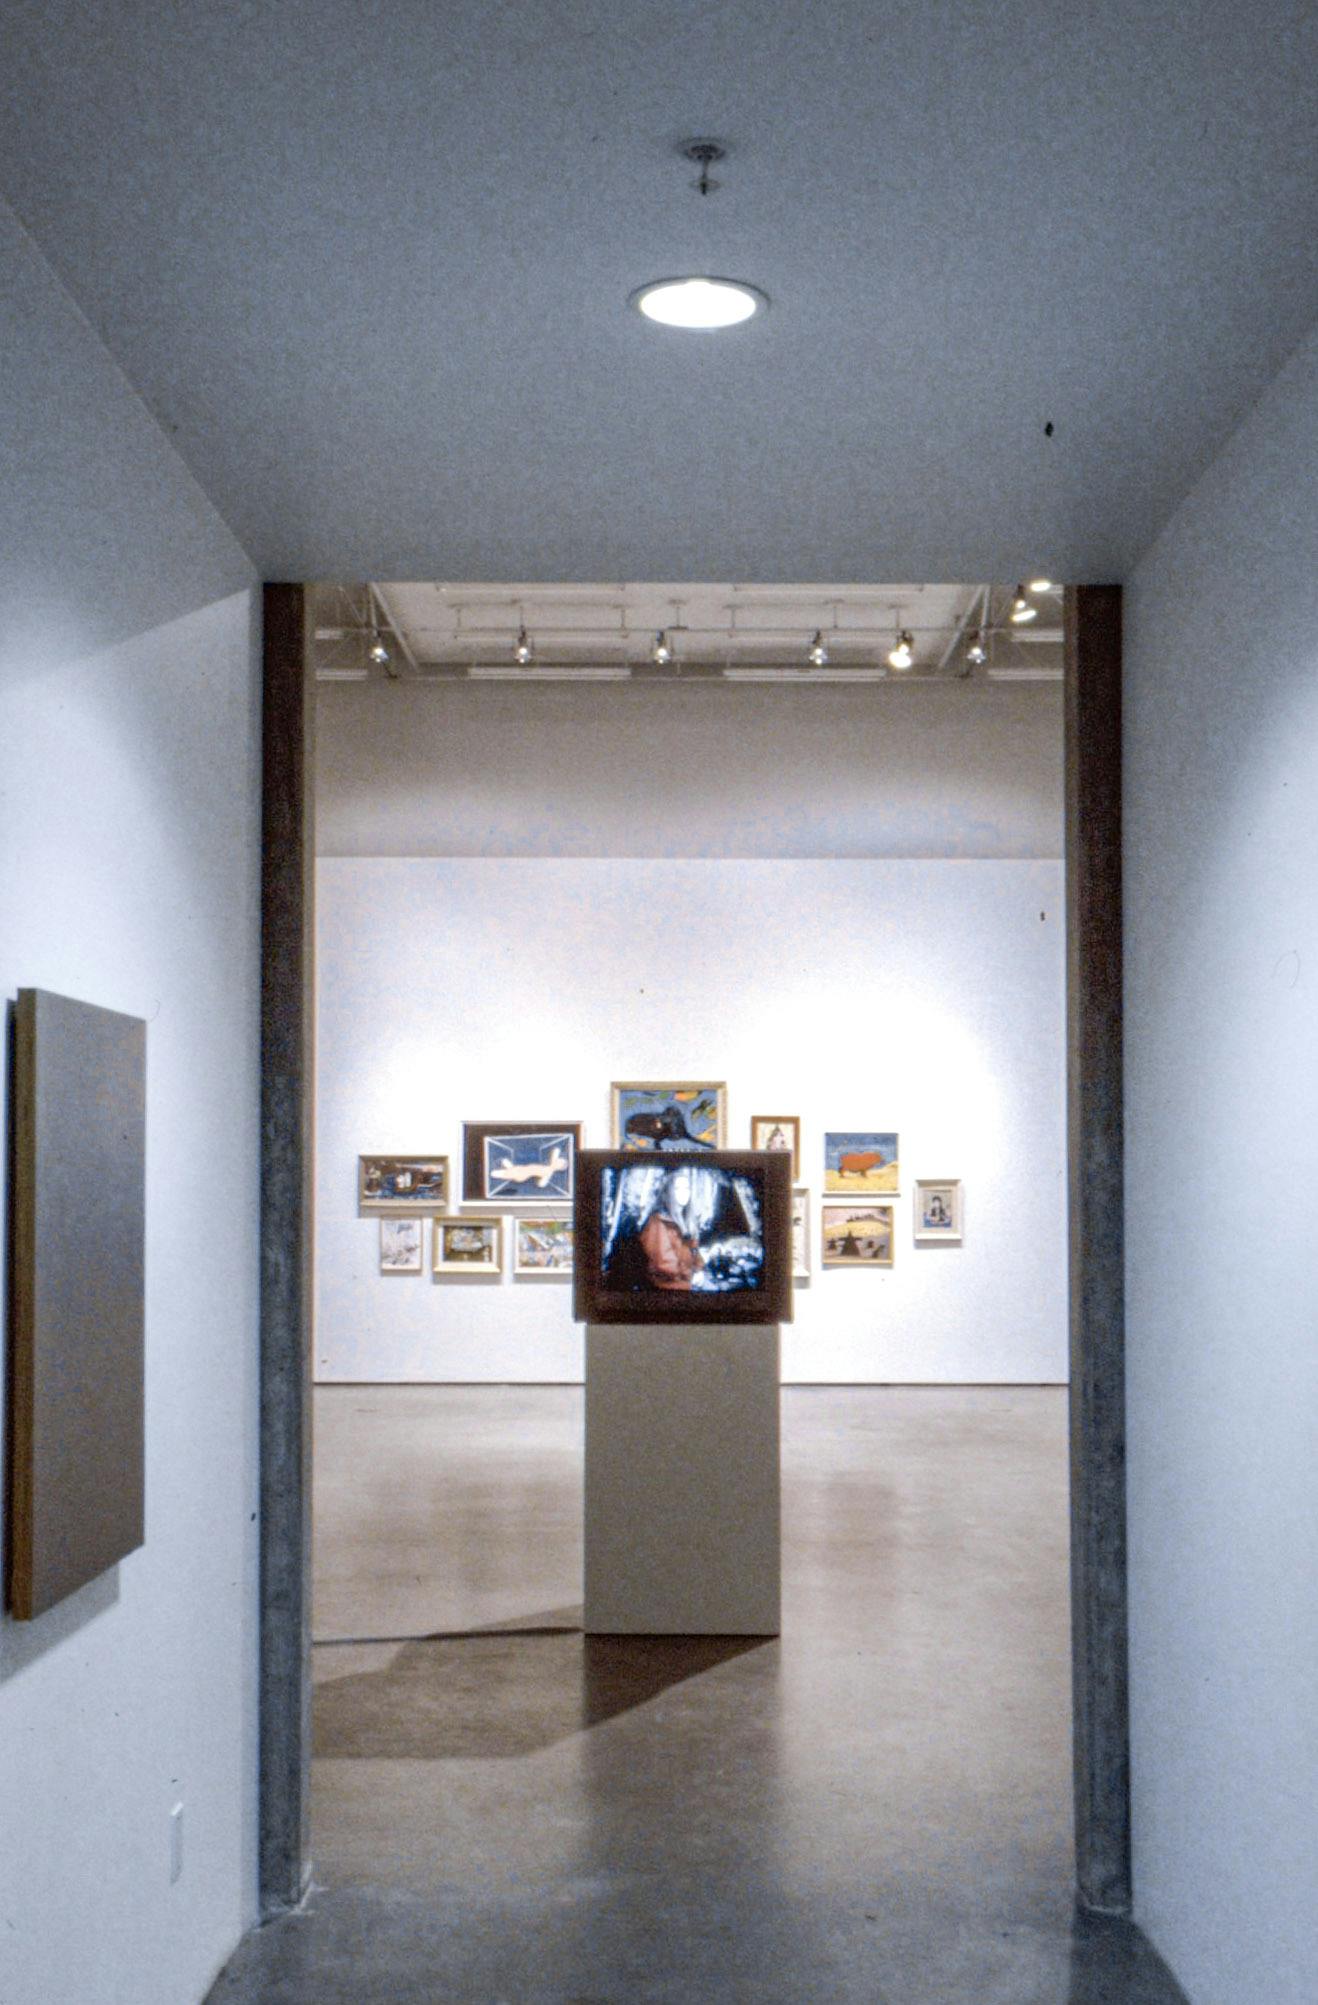 A CRT TV is placed on a pedestal installed in the middle of the gallery space. The video played on the TV shows abstract shapes. Some paintings mounted on the wall are visible behind the TV.